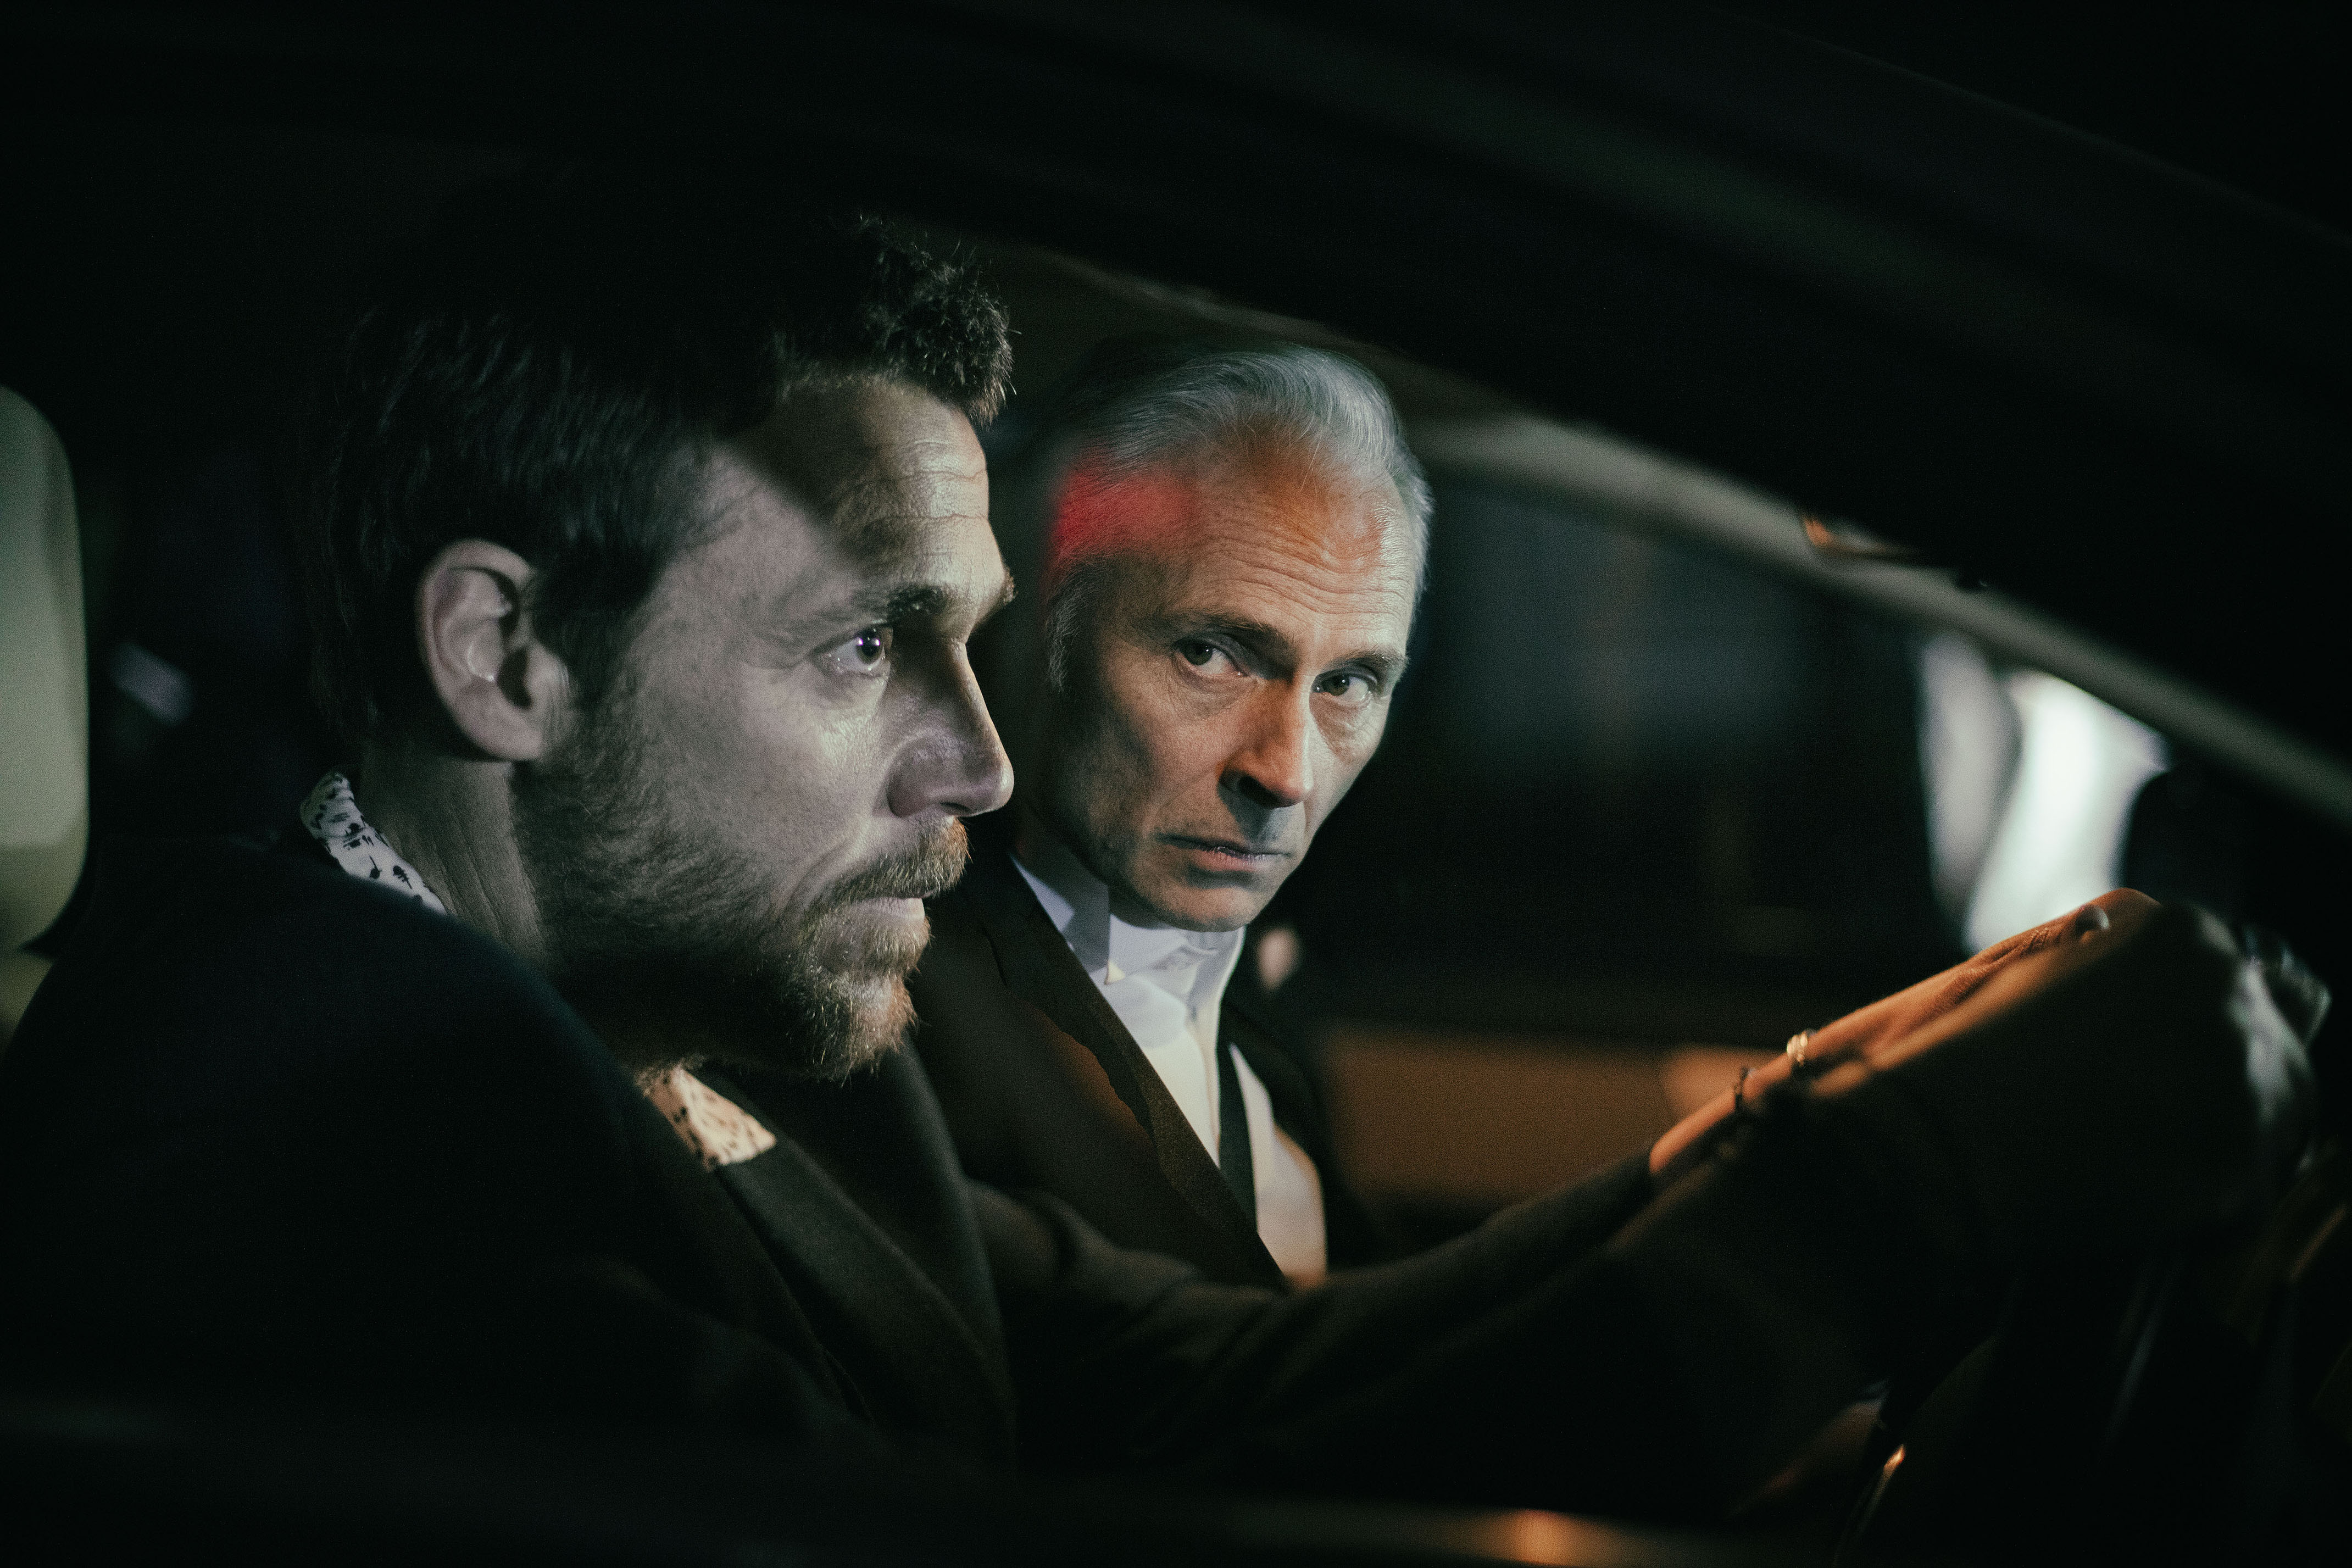 Jamie Sives and Mark Bonnar in Guilt